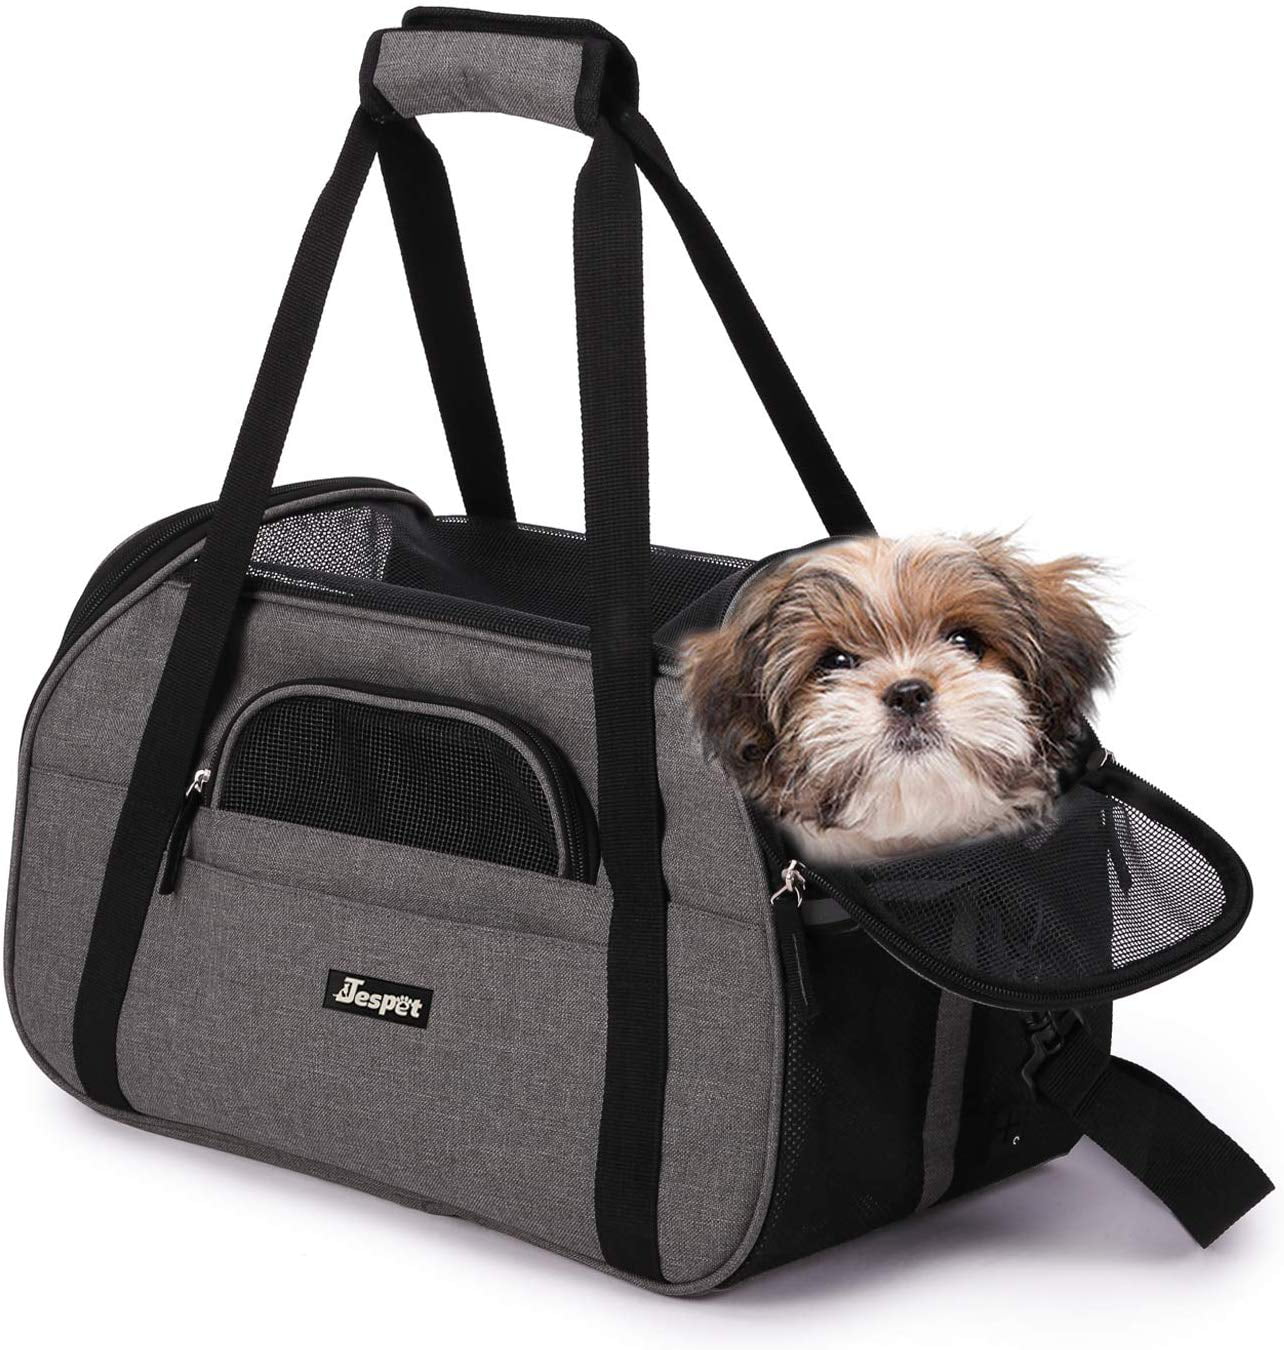 Breathable 4-Windows Design perfrom Pet Carrier Soft Cat Carrier Airline Approved Soft Side Pet Carrier for Cats Small Dogs Travel Carrying Handbag 